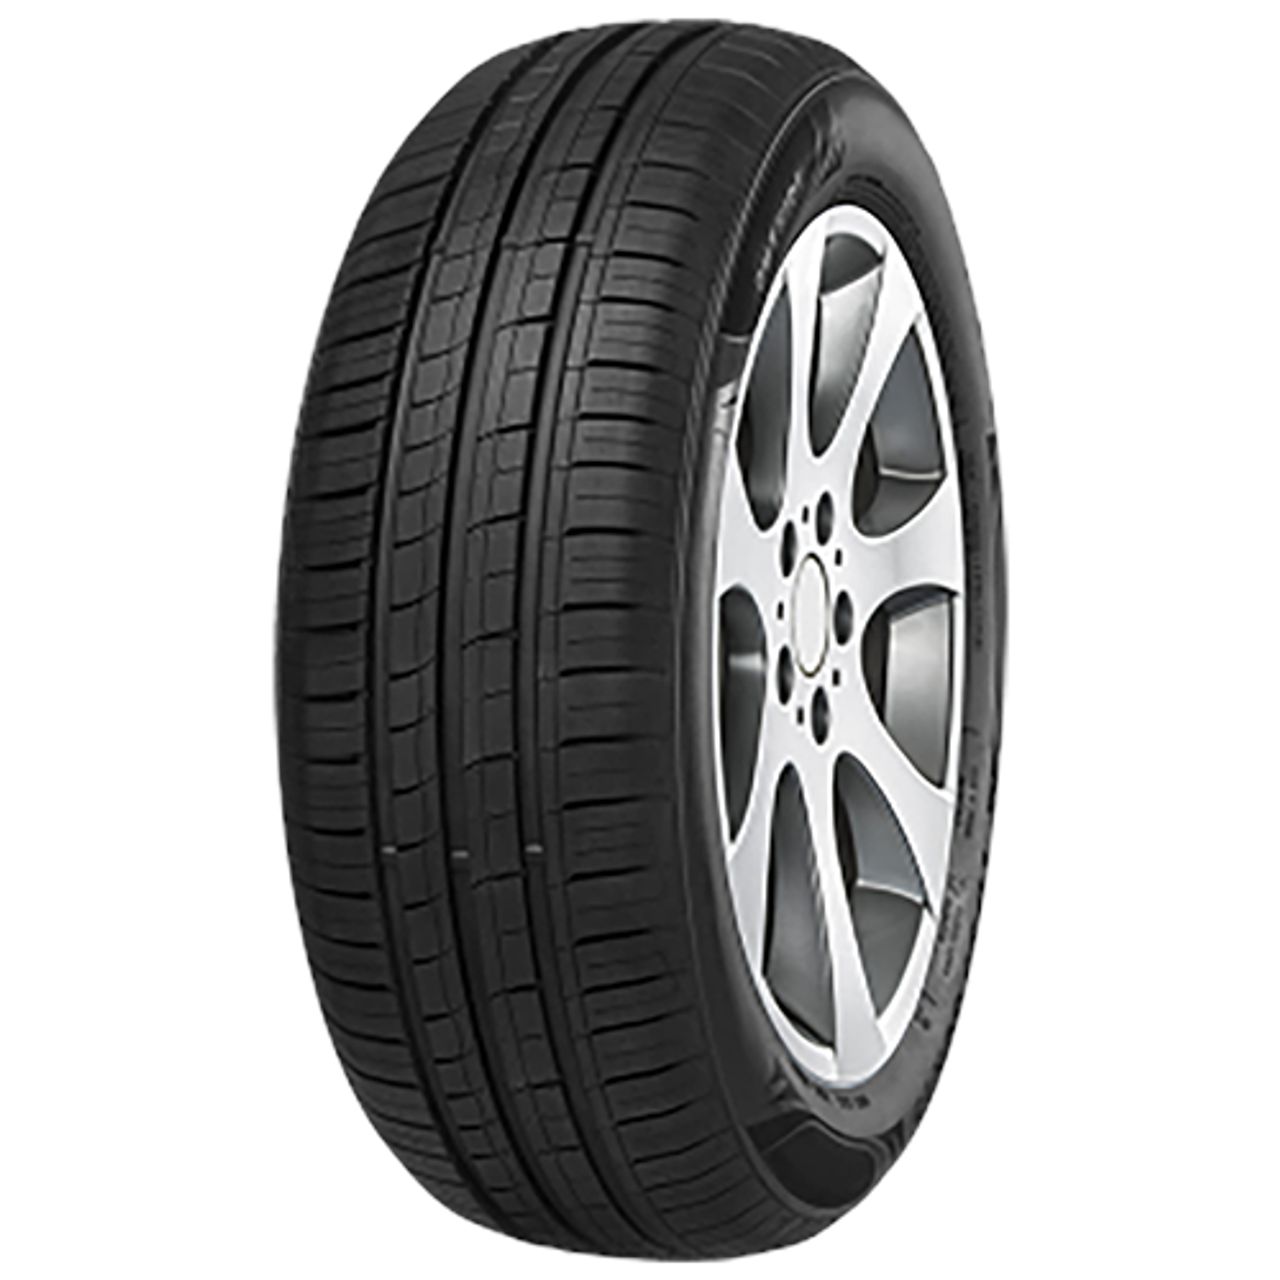 IMPERIAL ECODRIVER 4 145/60R13 66T BSW